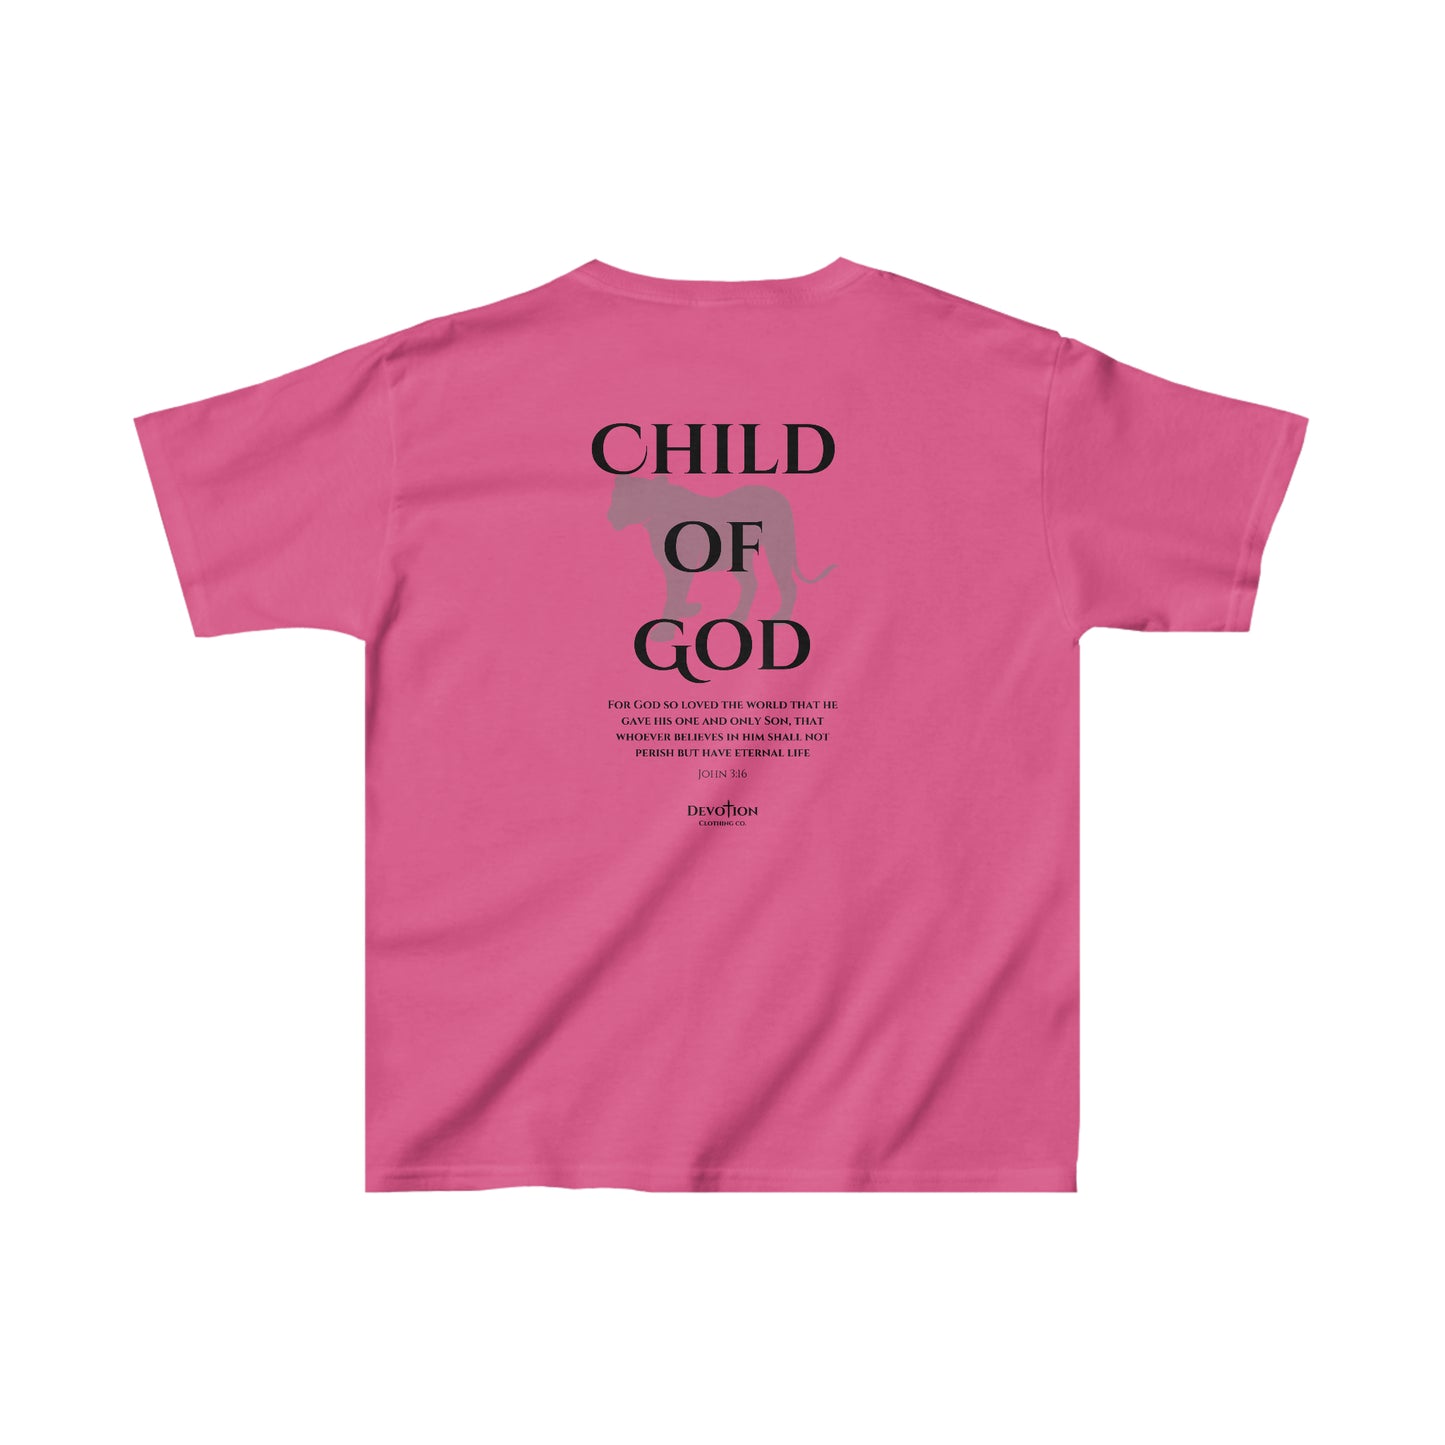 Youth Child of God Tee